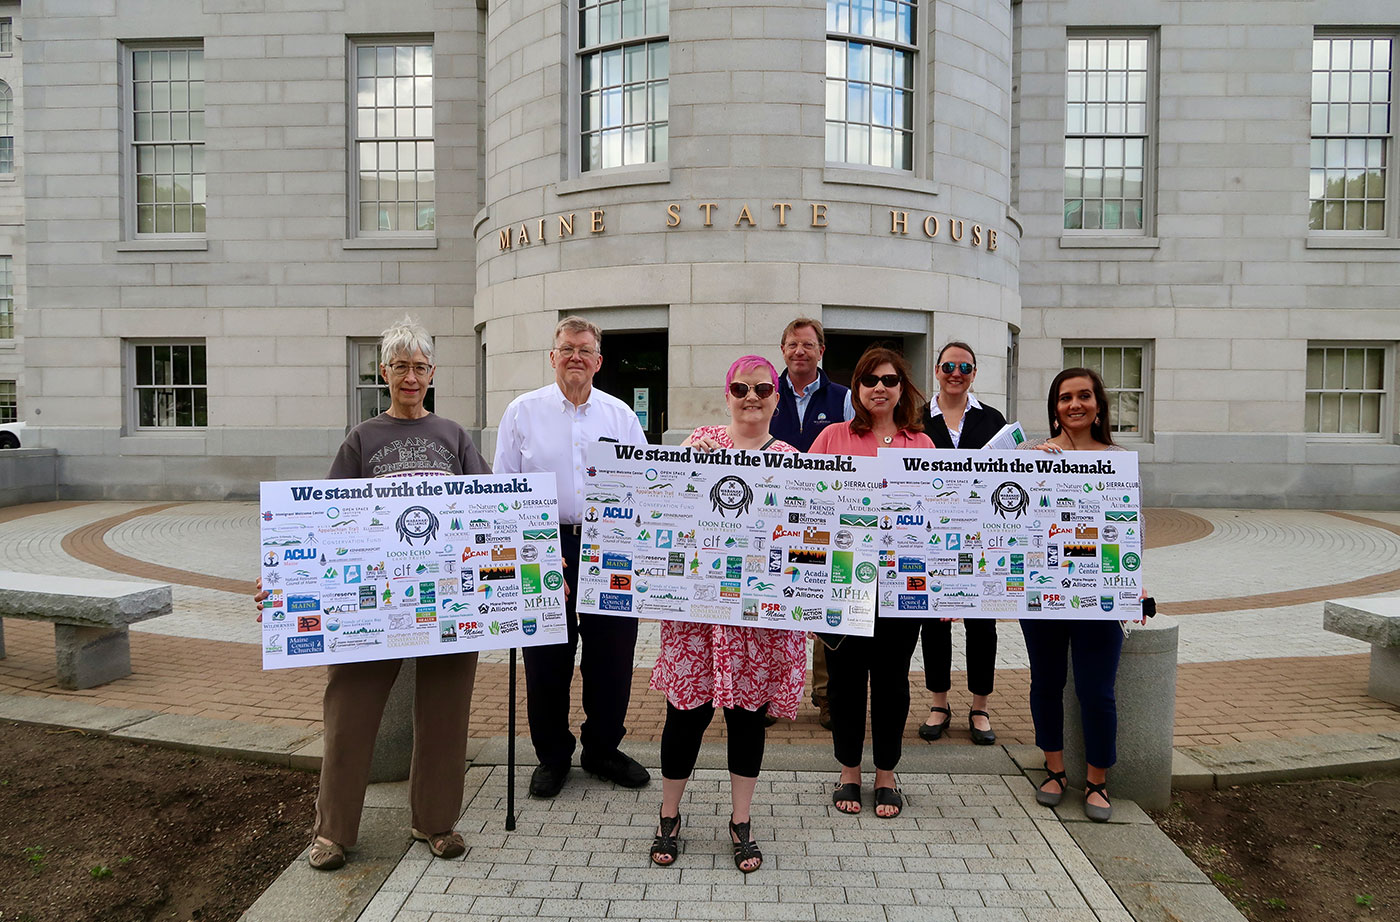 Supporters of Tribal sovereignty with signs outside Maine State House